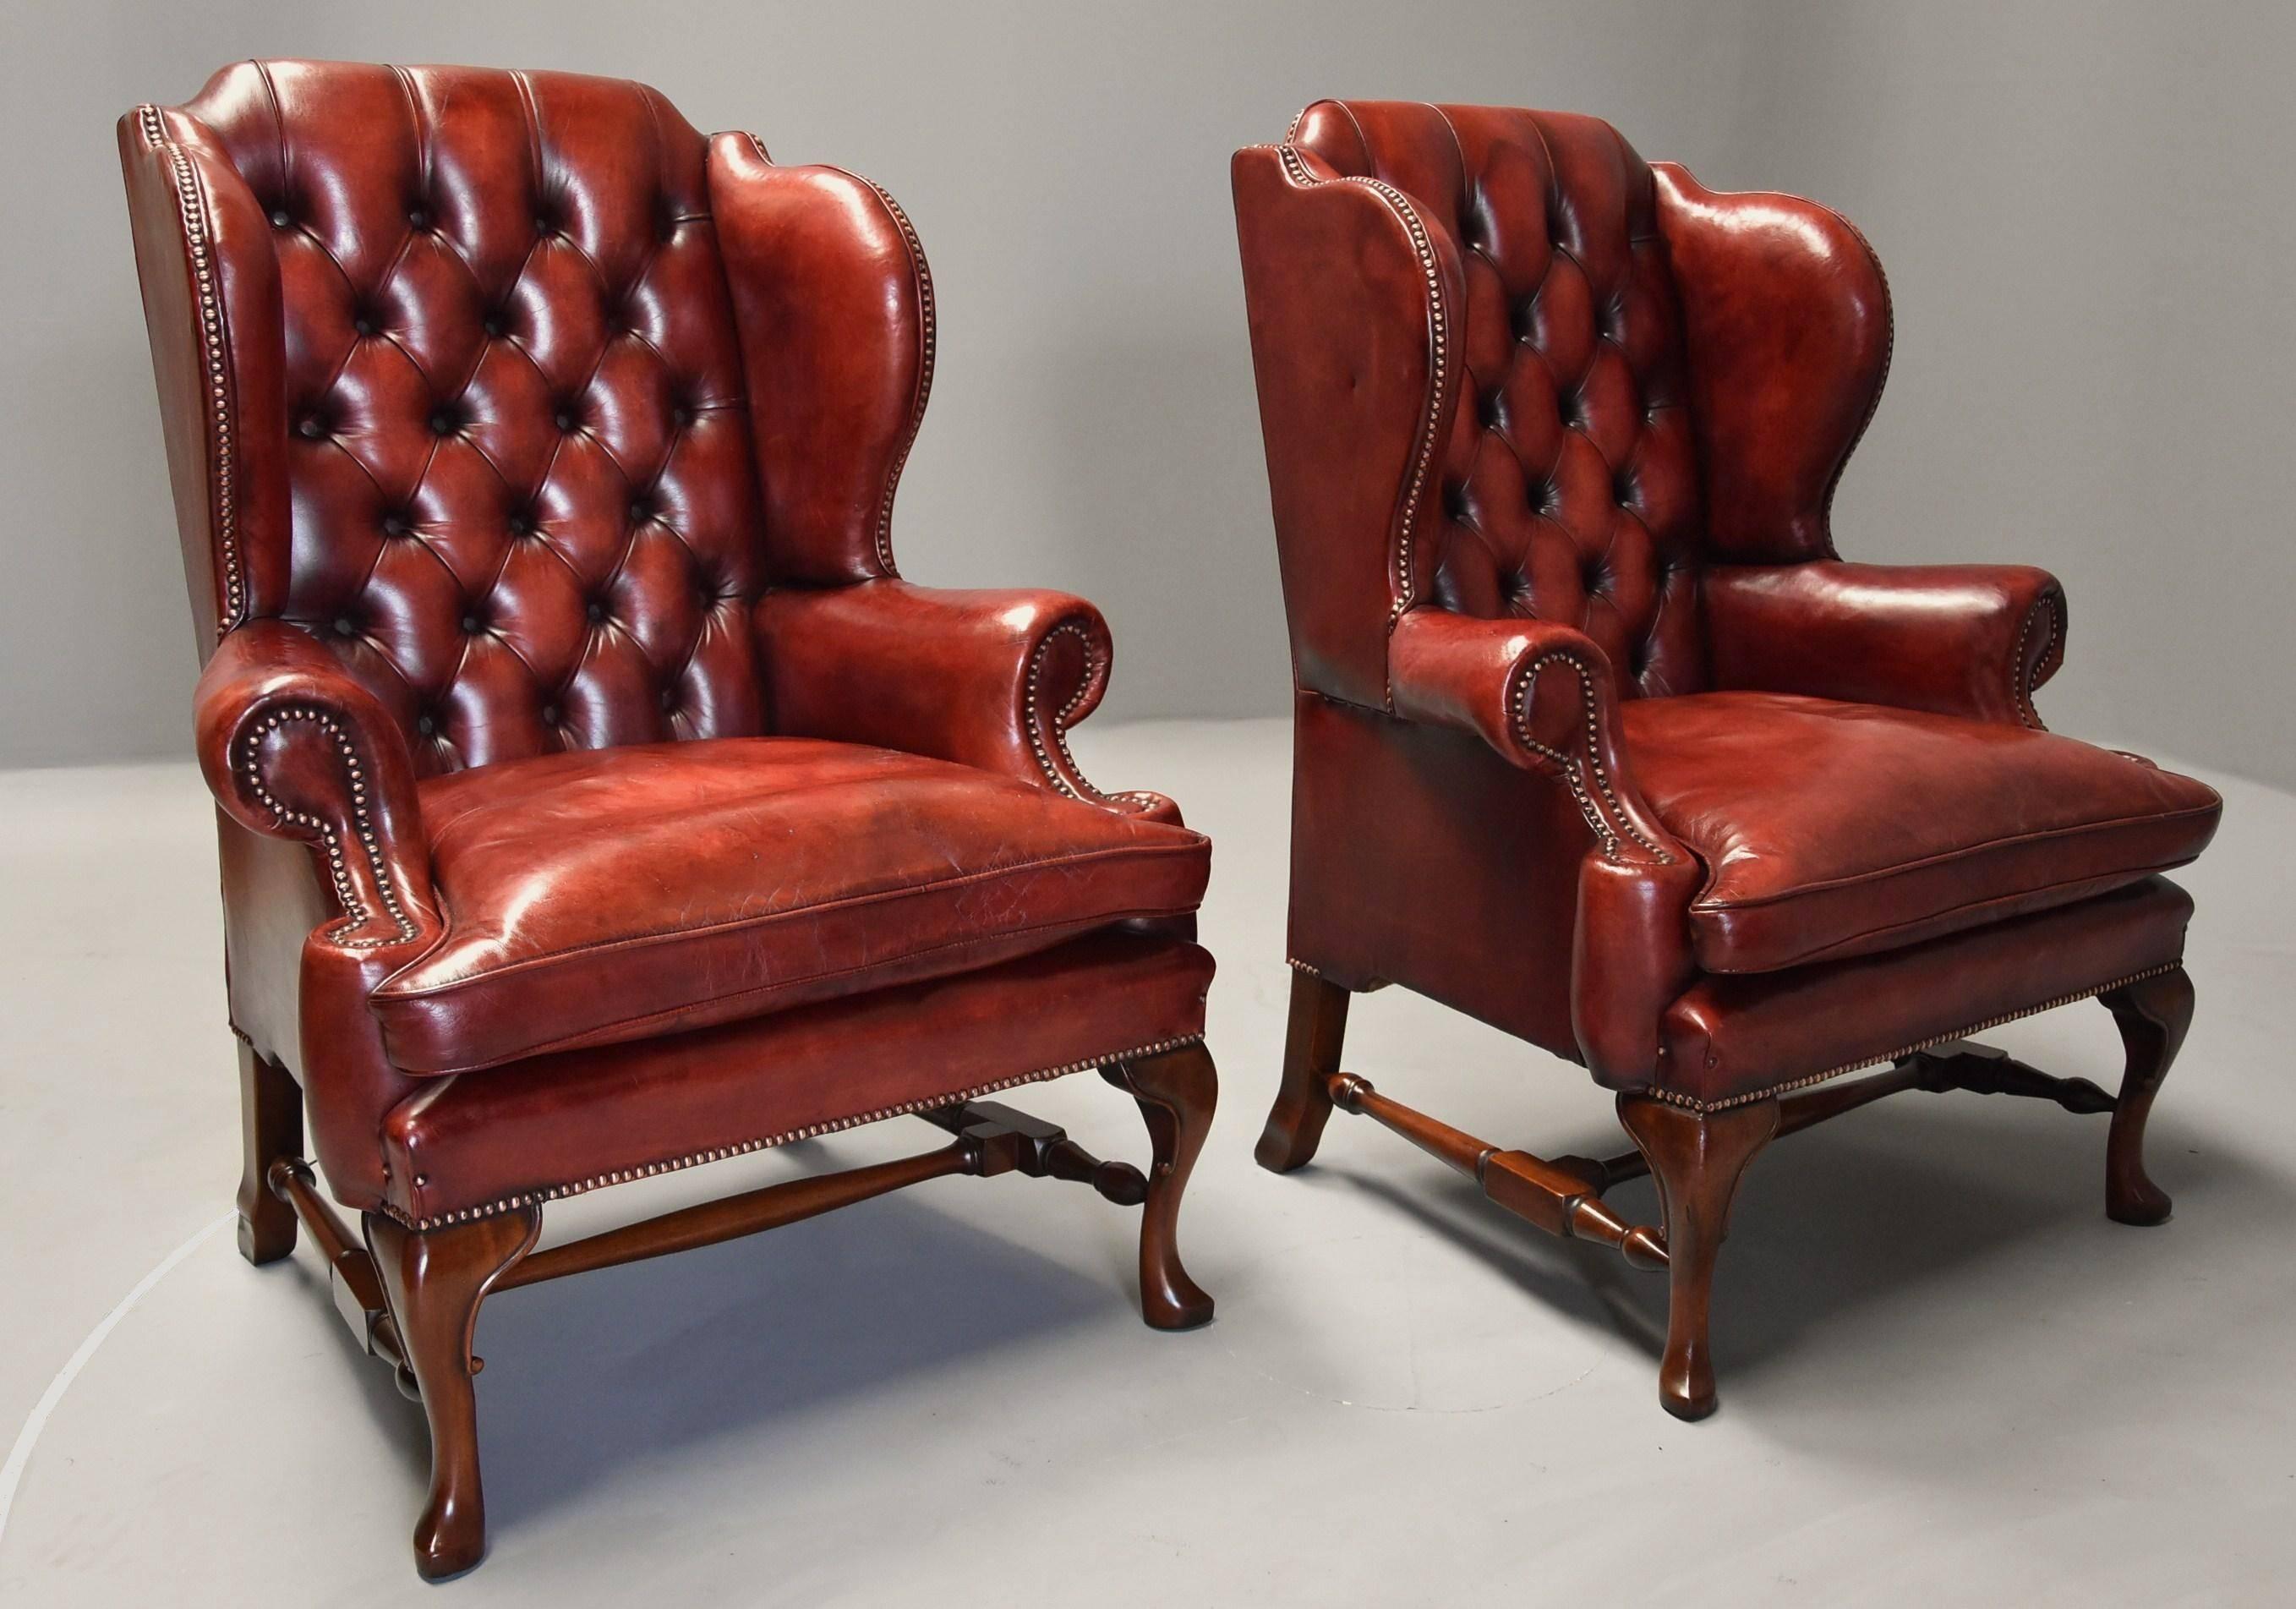 A superb pair of early 20th century Georgian style deep buttoned red leather wing armchairs.

These superb chairs each consist of a deep buttoned back with 'wings' to the top with a leather loose seat cushion, the chairs their retaining original